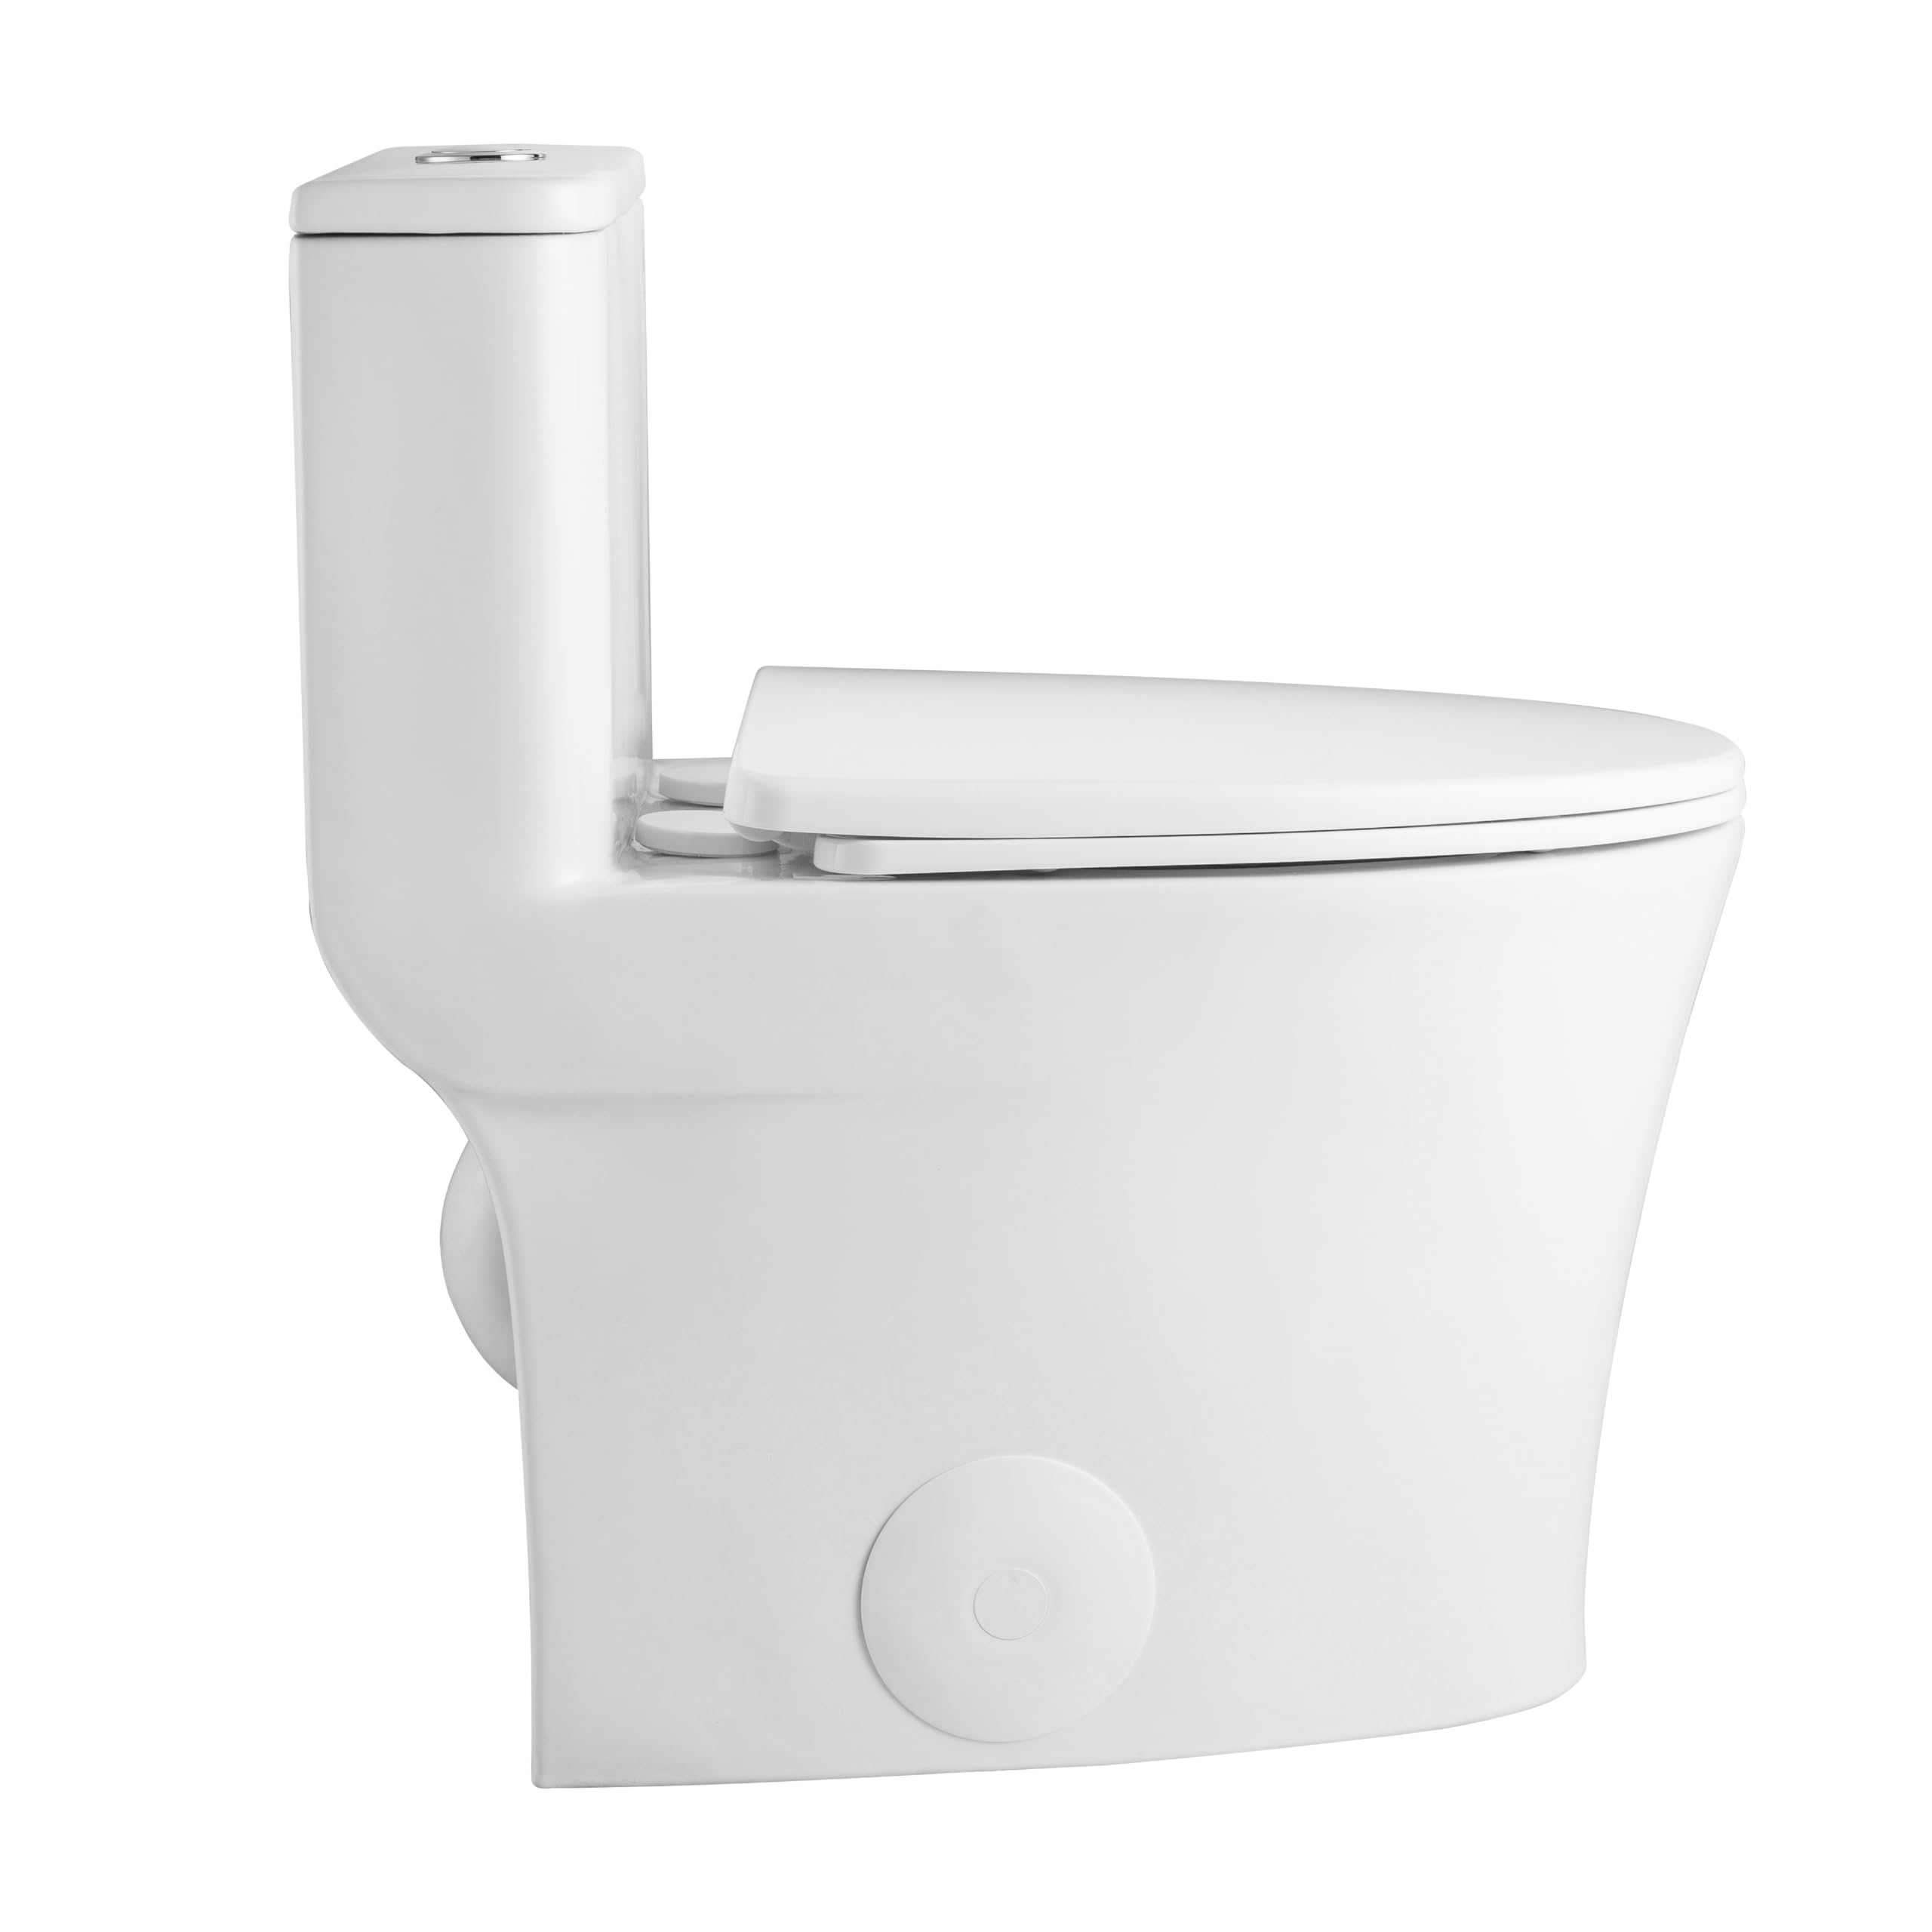 DeerValley Symmetry One Piece Toilet Elongated, Small Toilet Compact Modern One Piece Toilet with Soft Close Toilet Seat Ceramic Glossy White Toilets Single Flush for Small Bathroom Space DV-1F52807A